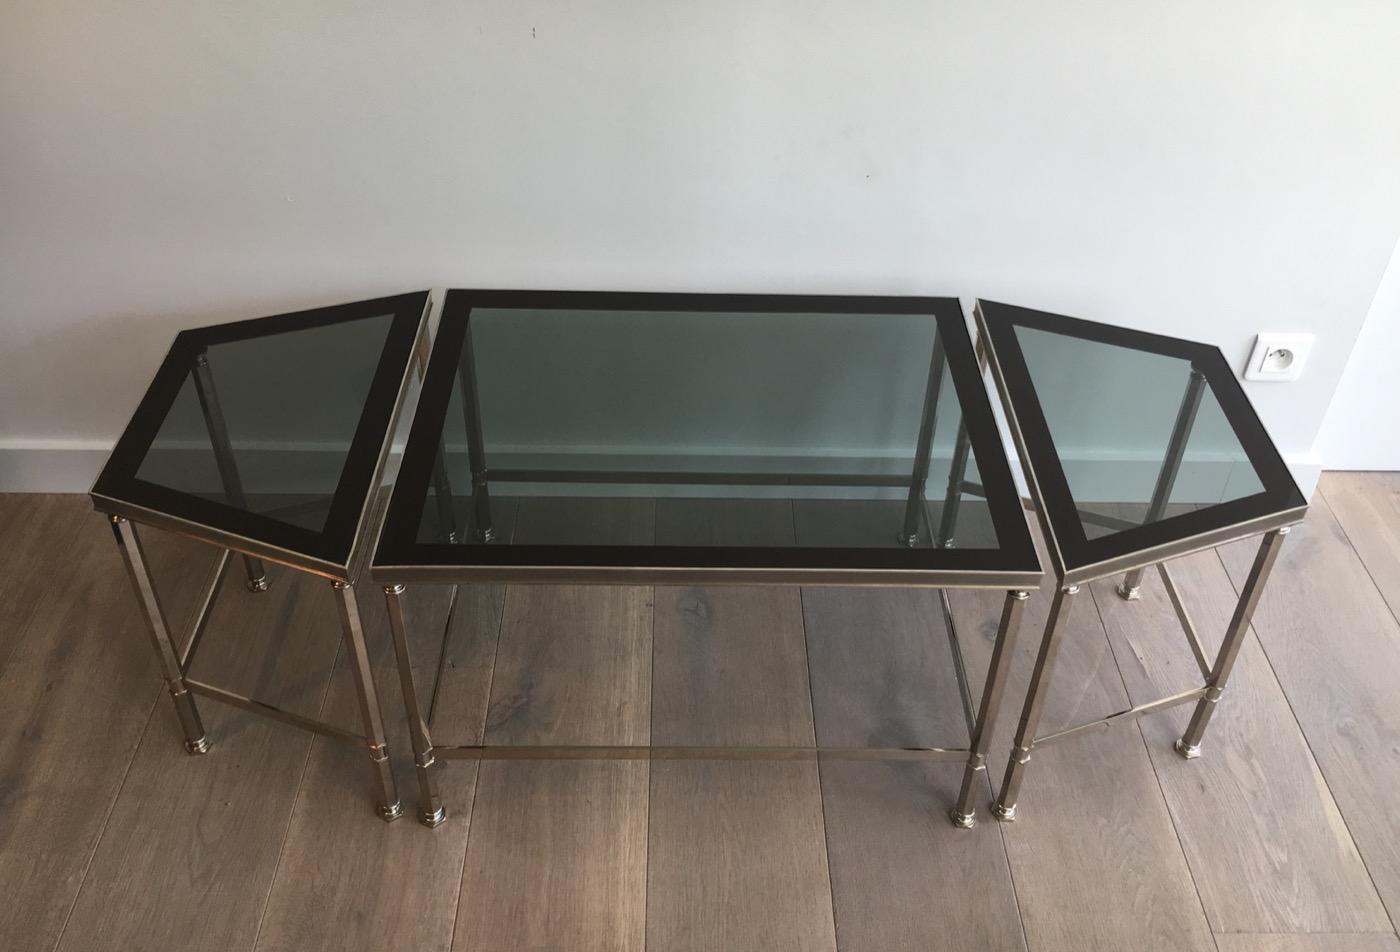 Rare Nickeled Tripartite Coffee Table with Glass Tops Lacquered All Around For Sale 7